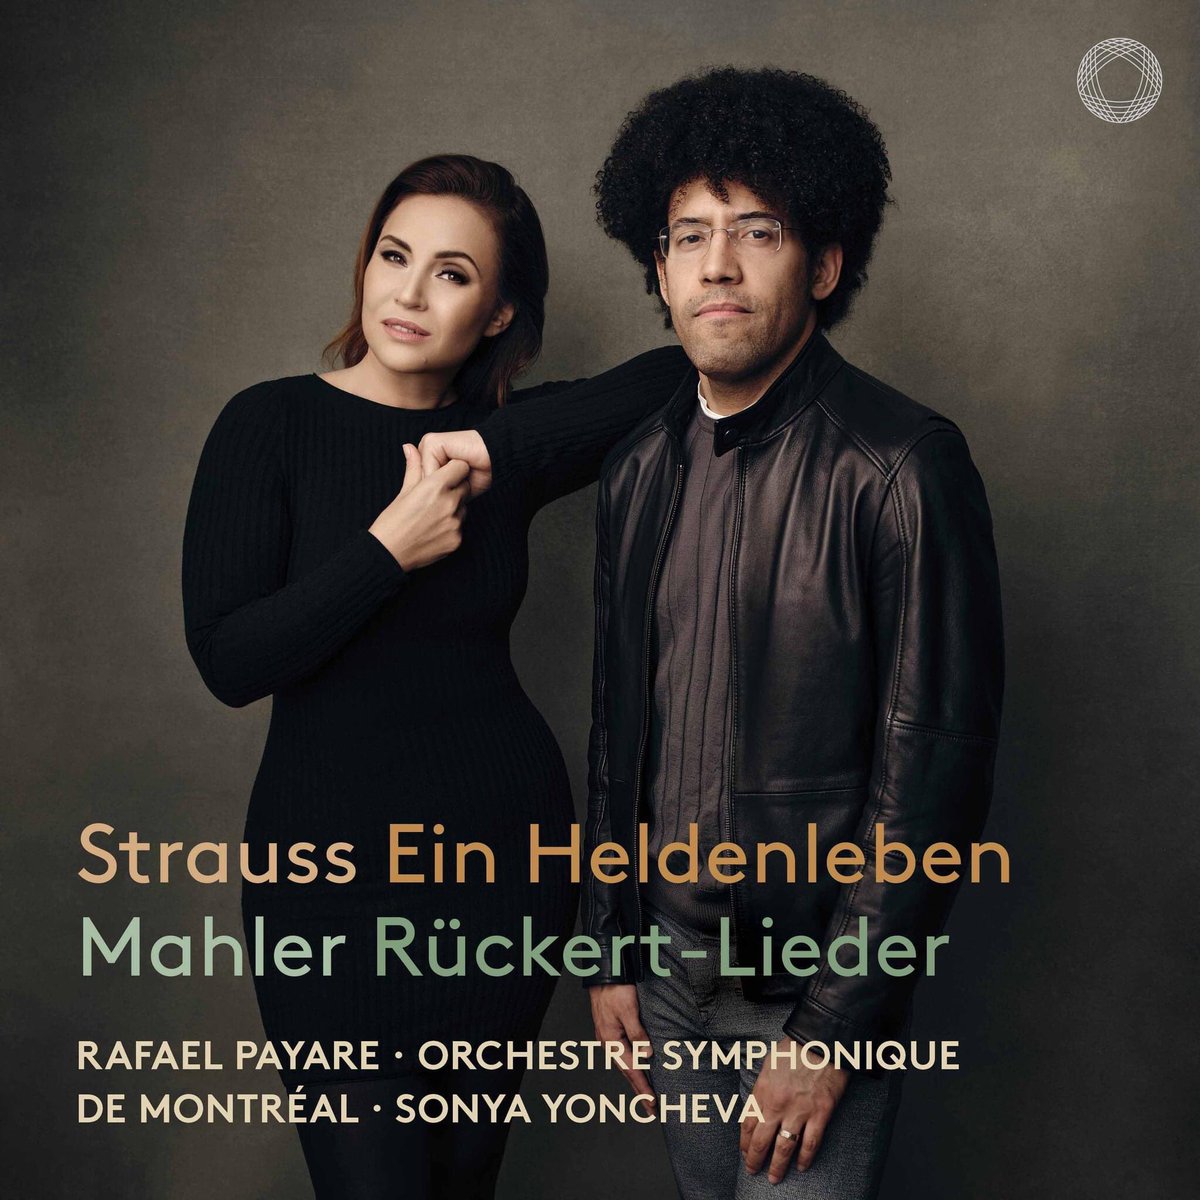 Delving into #Mahler's music singing his magnificent #RückertLieder last year with @OSMconcerts& @rafaelpayare was such a great experience and I’m delighted @PENTATONEmusic will publish this soon on CD! Release day is March 15.❤️💿🎶 #SonyaYoncheva